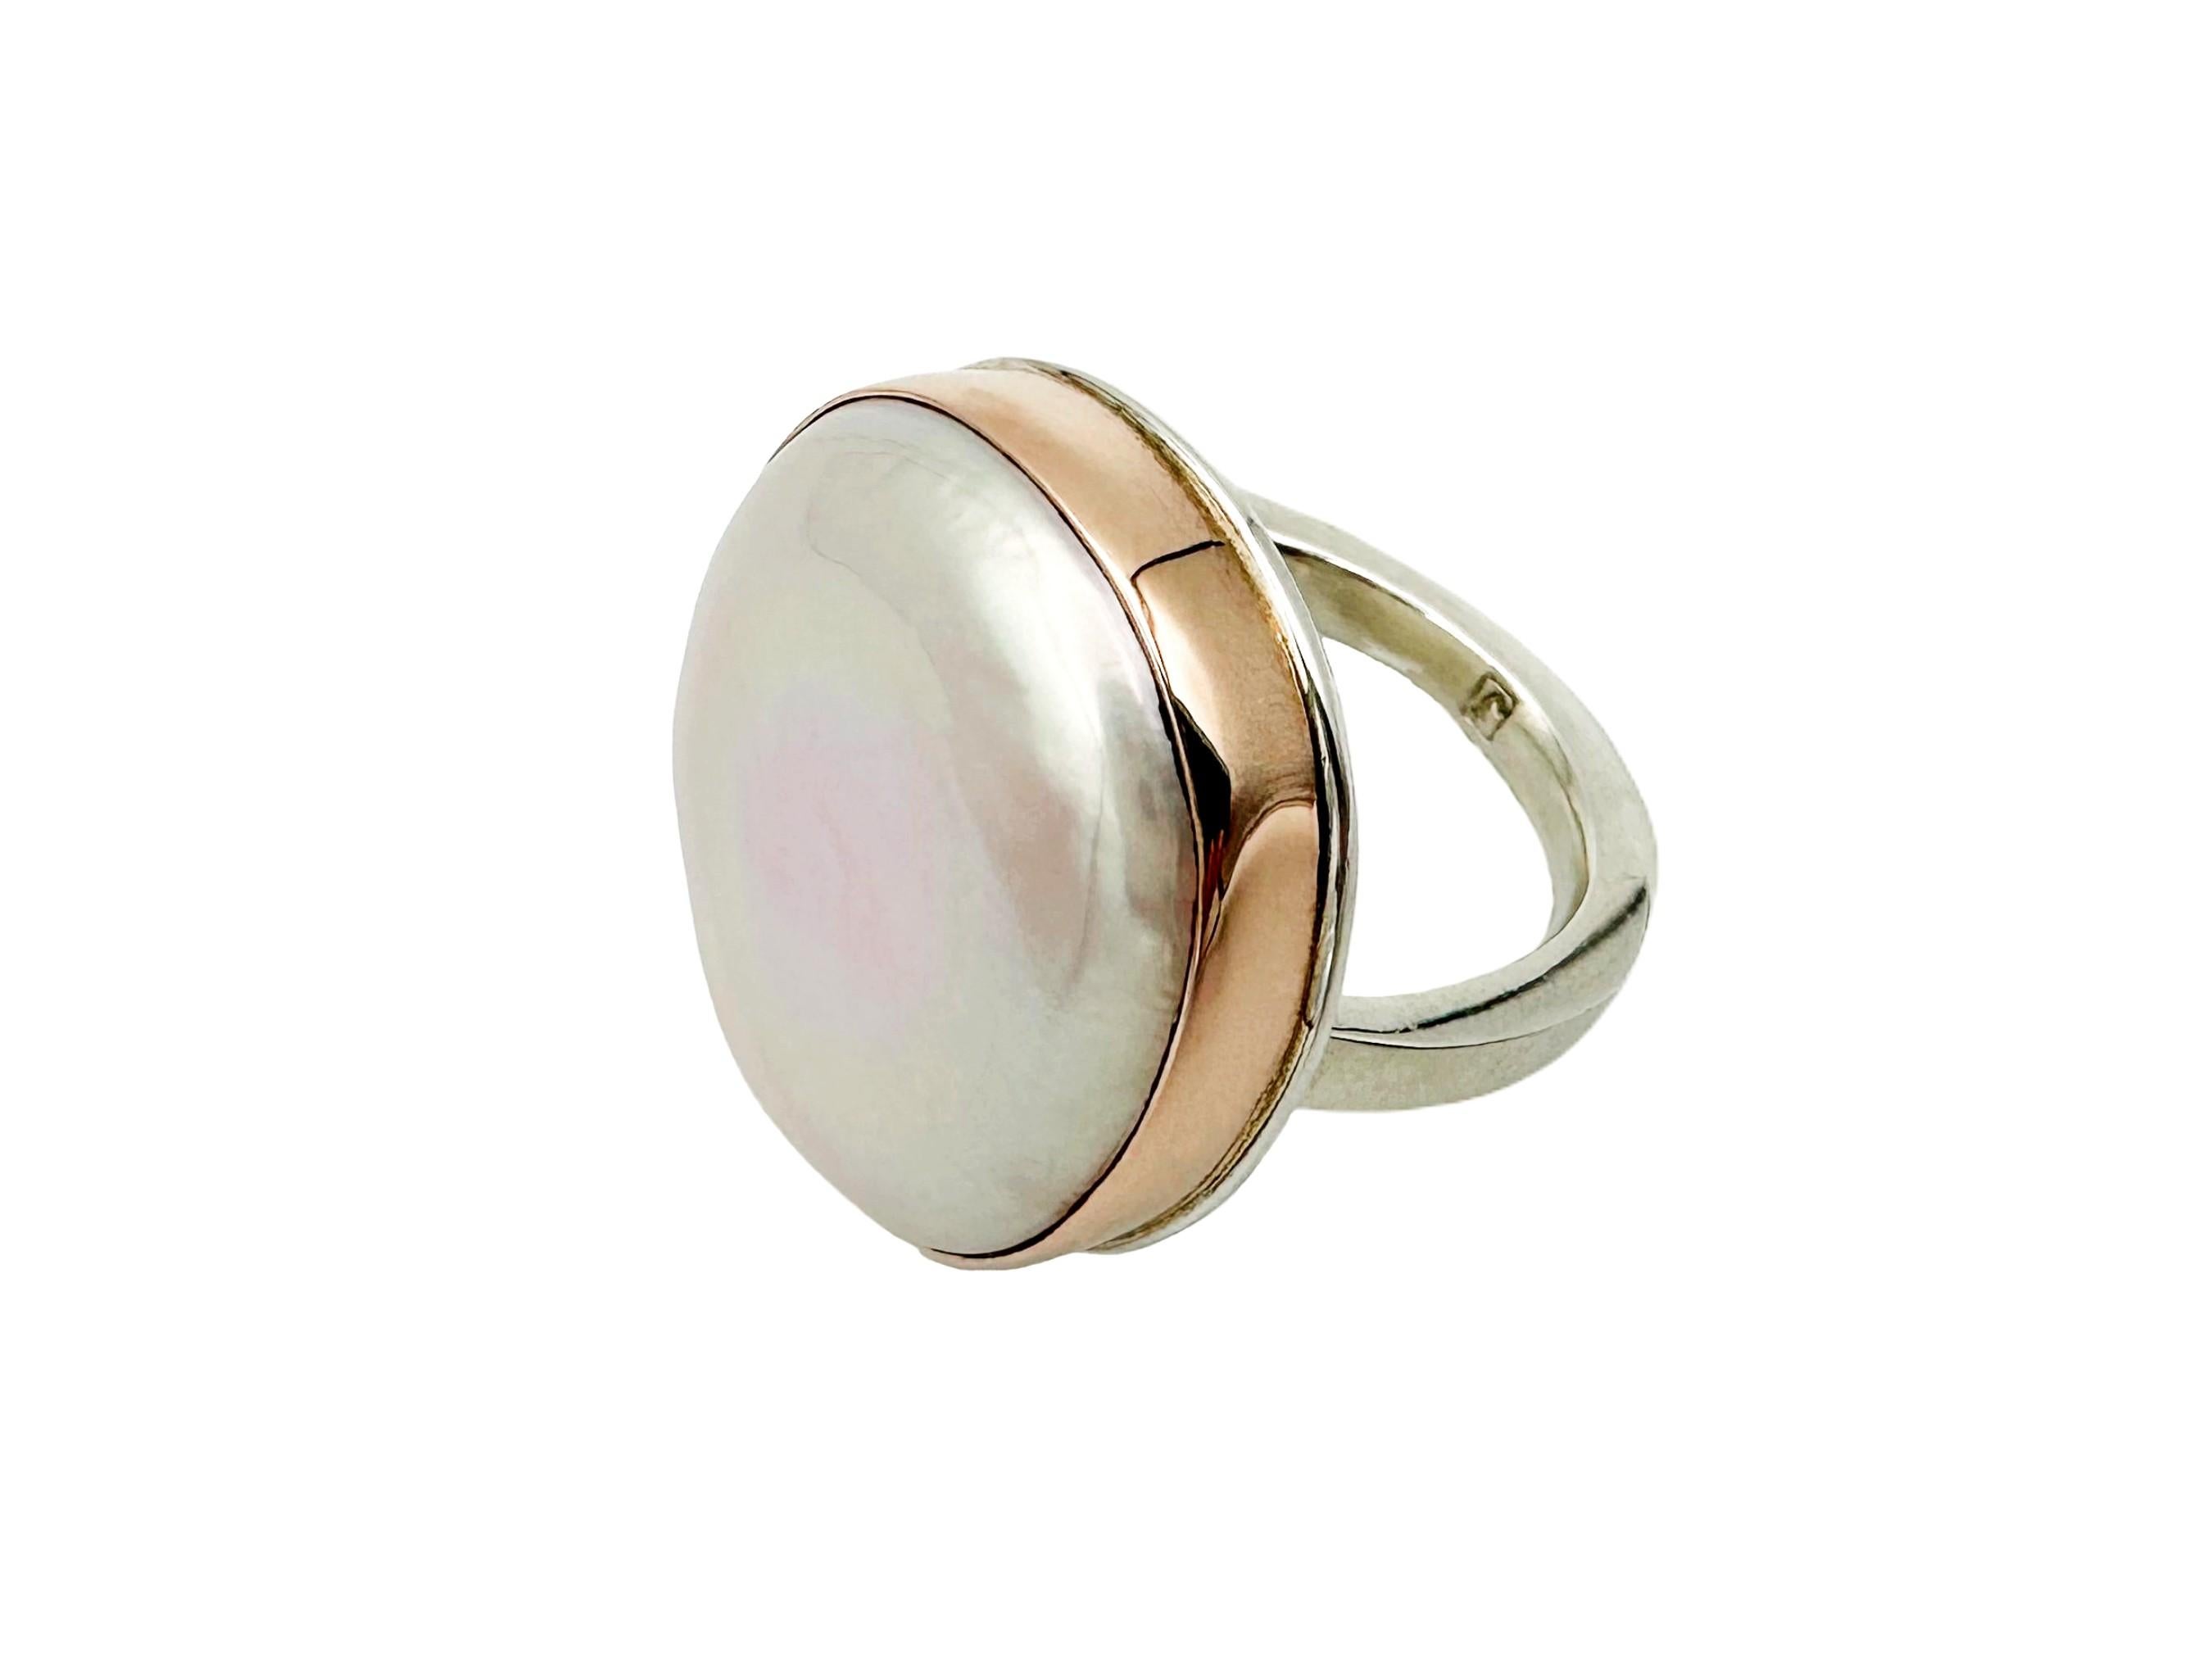 Uncut Jamie Joseph Pink Pearl 14K Rose Gold Sterling Silver Statement Ring Size 6.75 For Sale